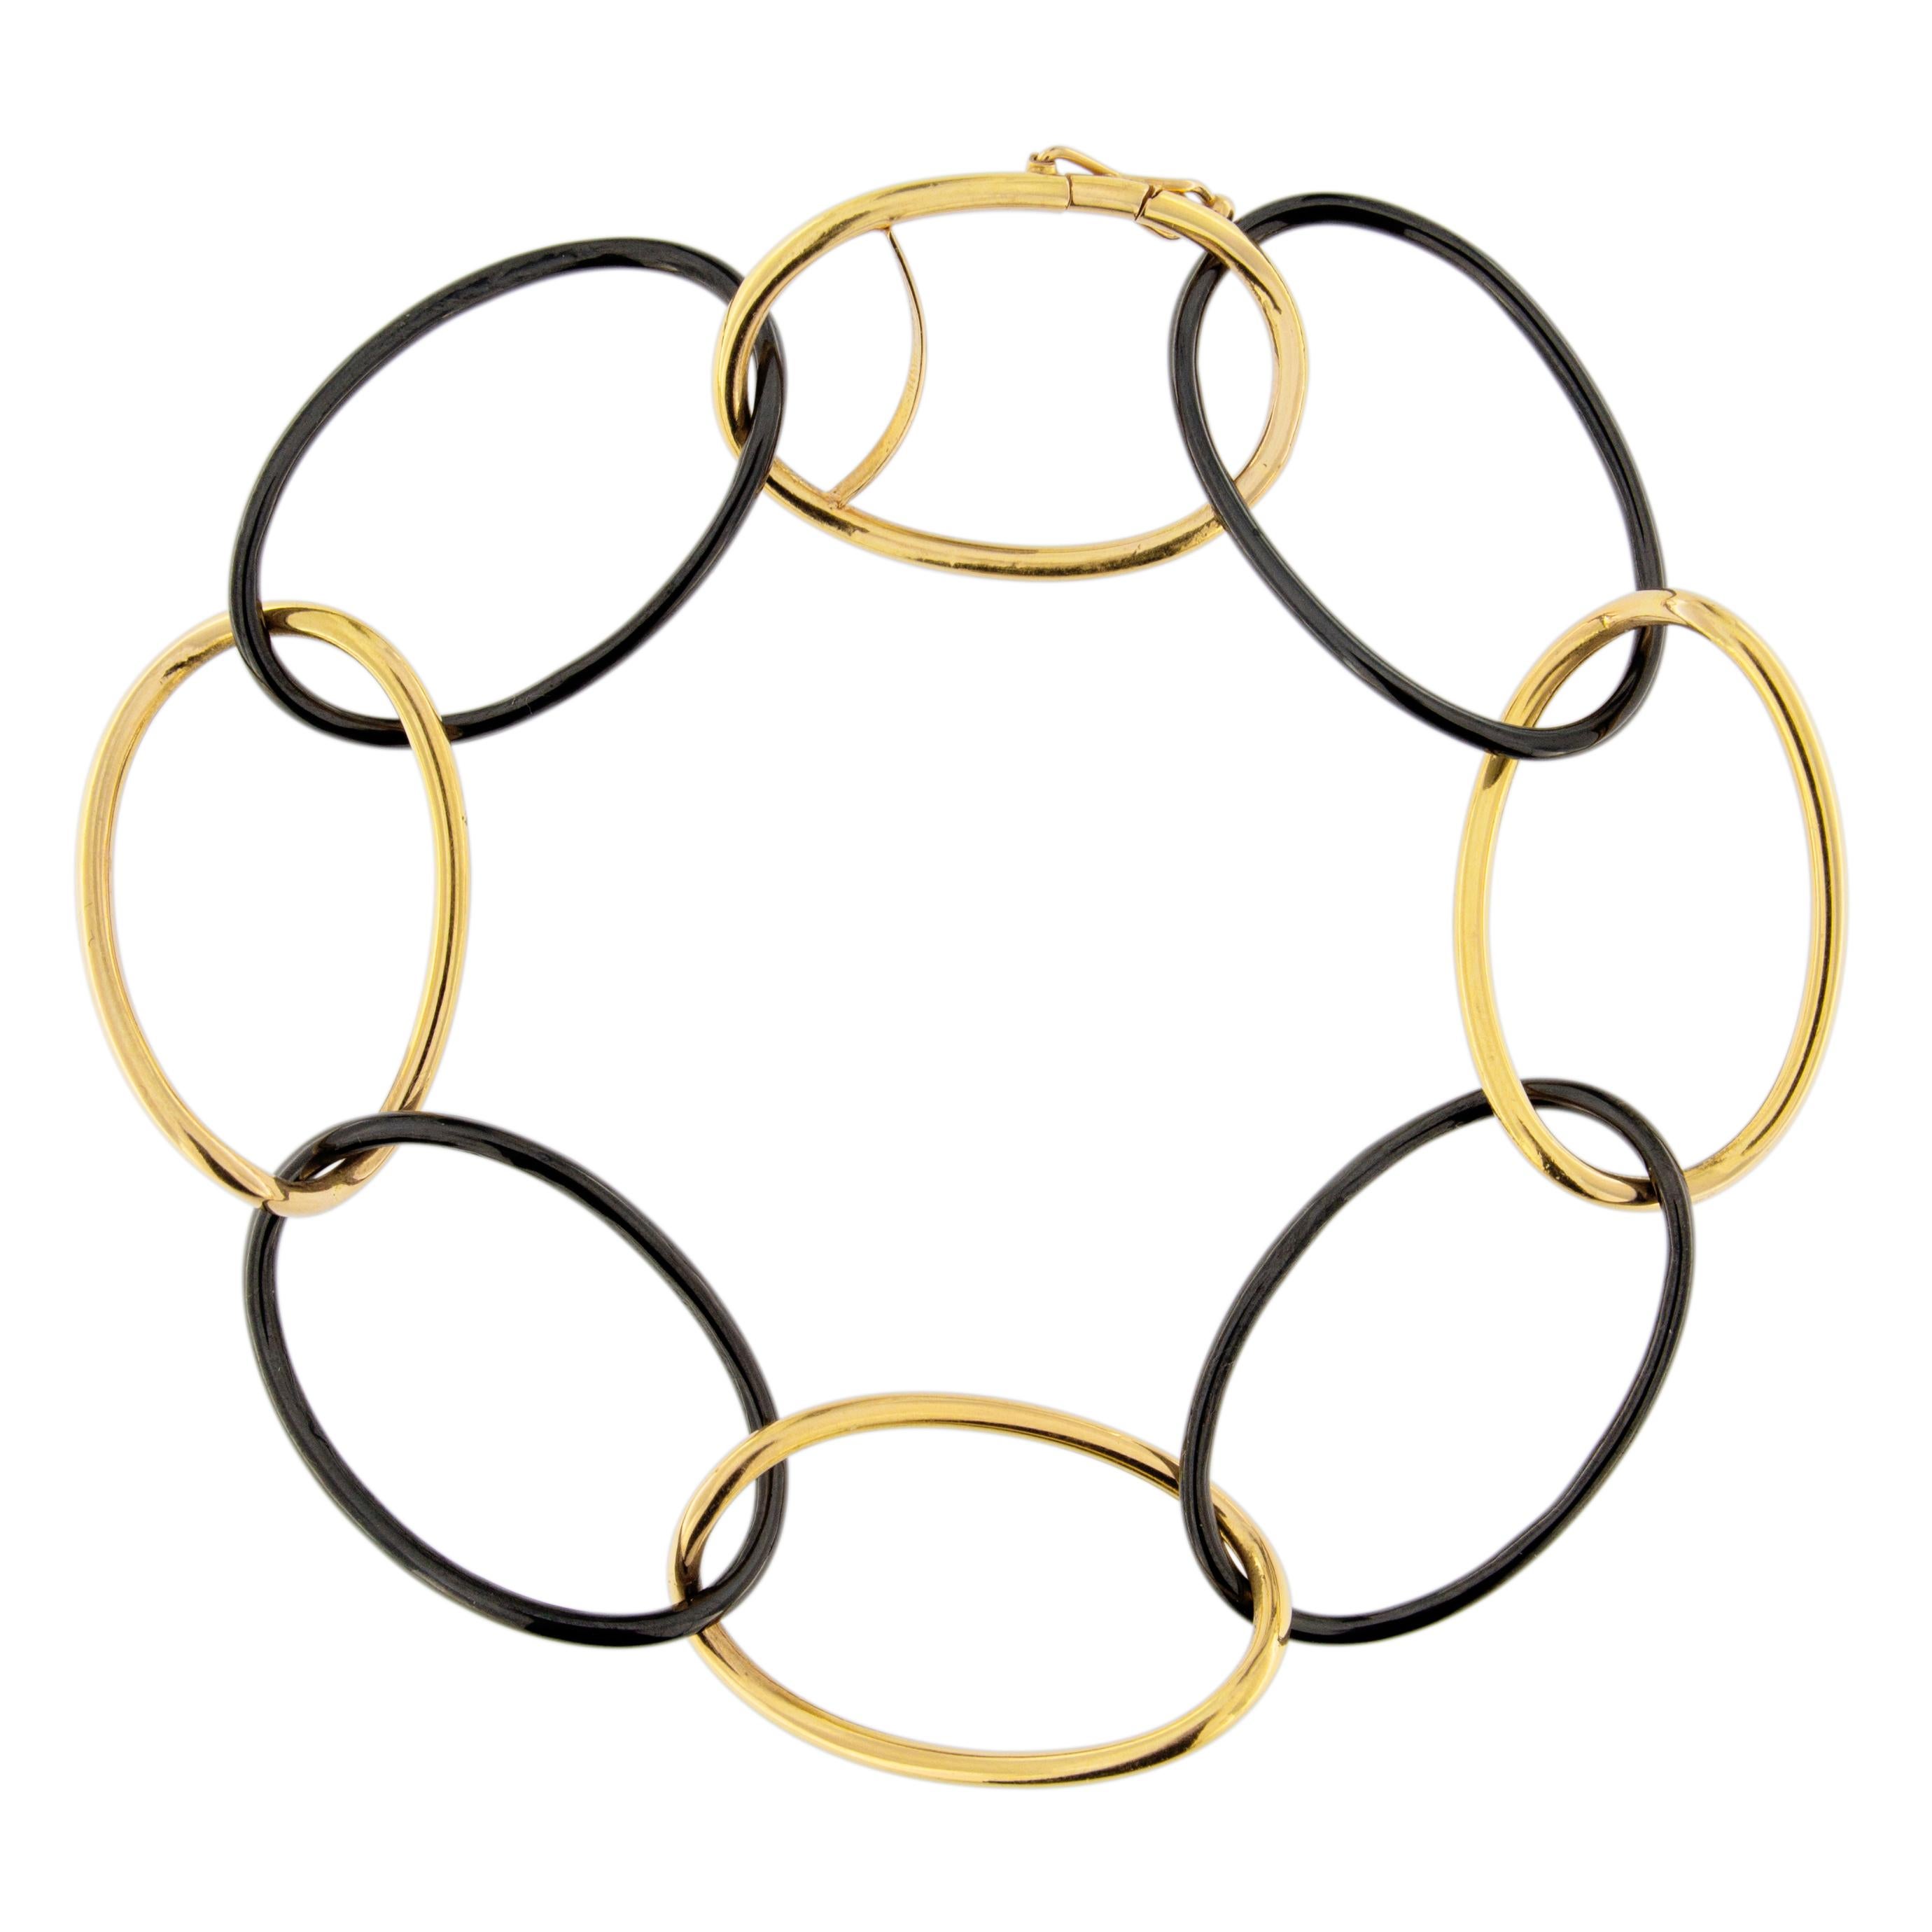 Jona design collection, hand crafted in Italy, 18k yellow gold and black high-tech
ceramic groumette link bracelet. 
Dimensions :  H x 0.4 cm, W x 19.4 cm, D x 0.9 cm - H x 0.15 in, W x 7.63 in, D x 0.35 in.
With a hardness approaching that of